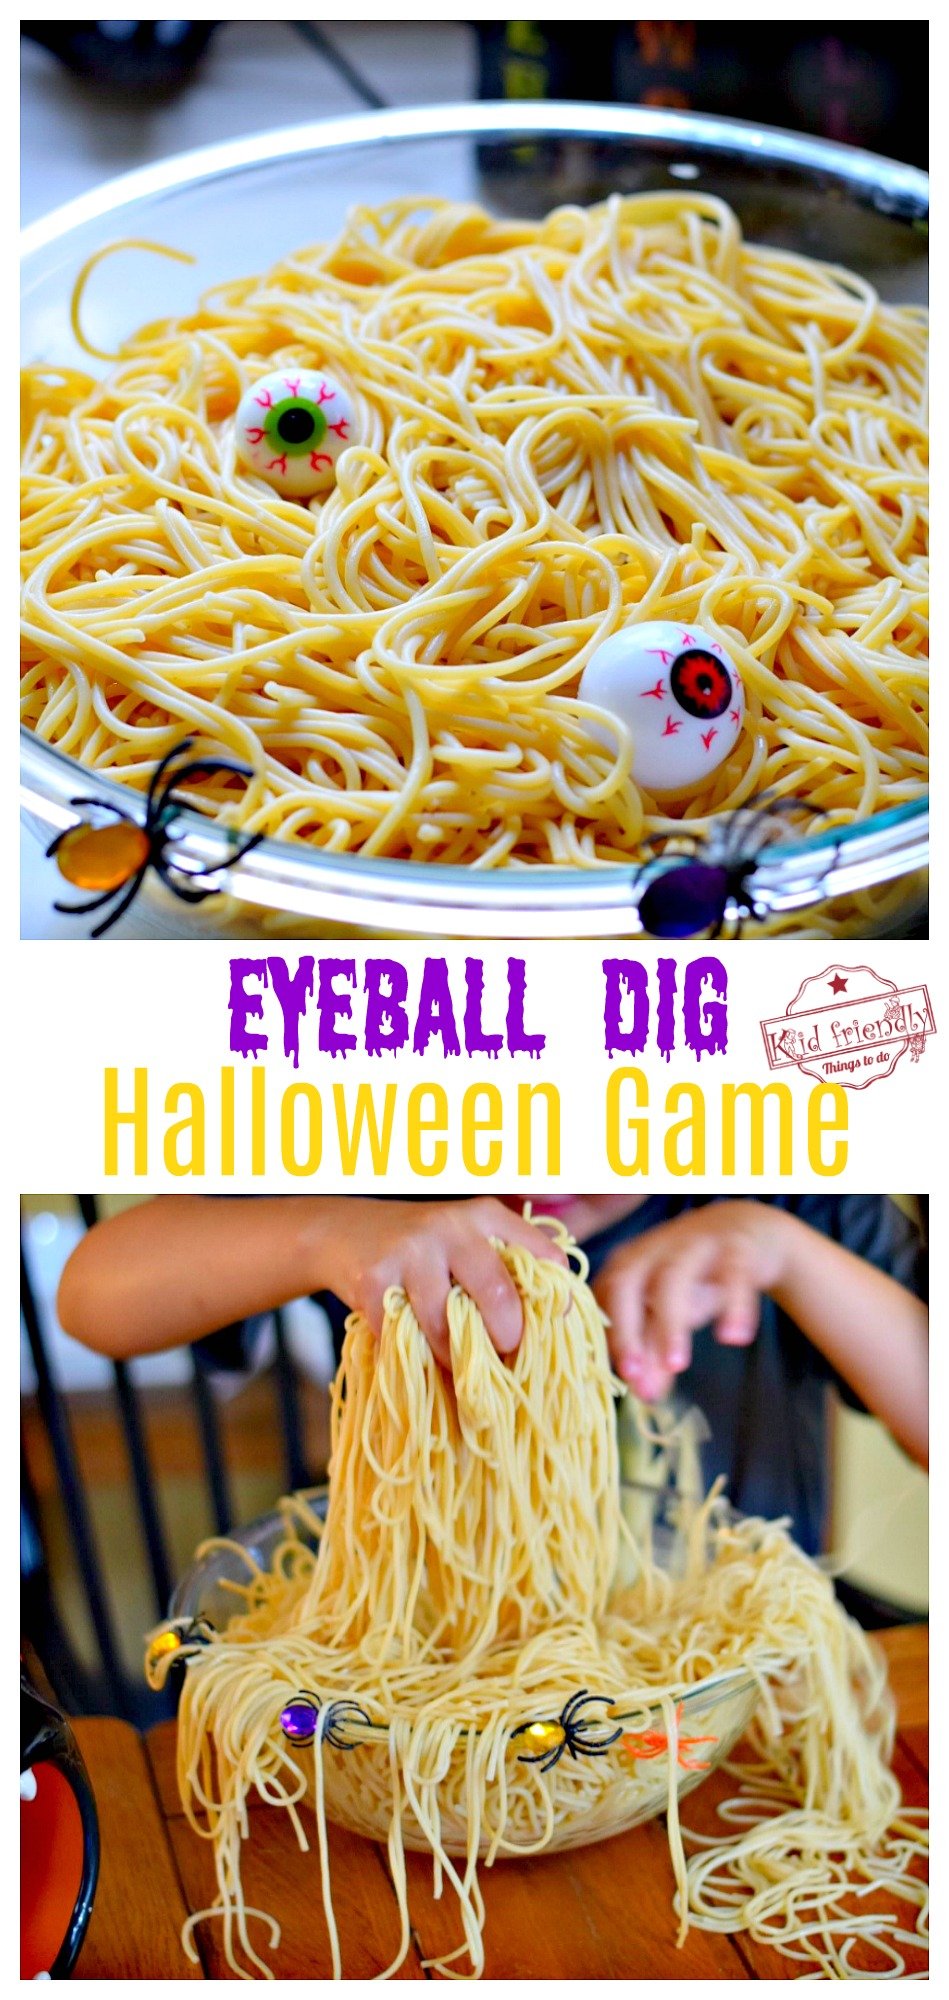 Fun Eyeball Dig Halloween Game for Kids and Teens to Play {with Video